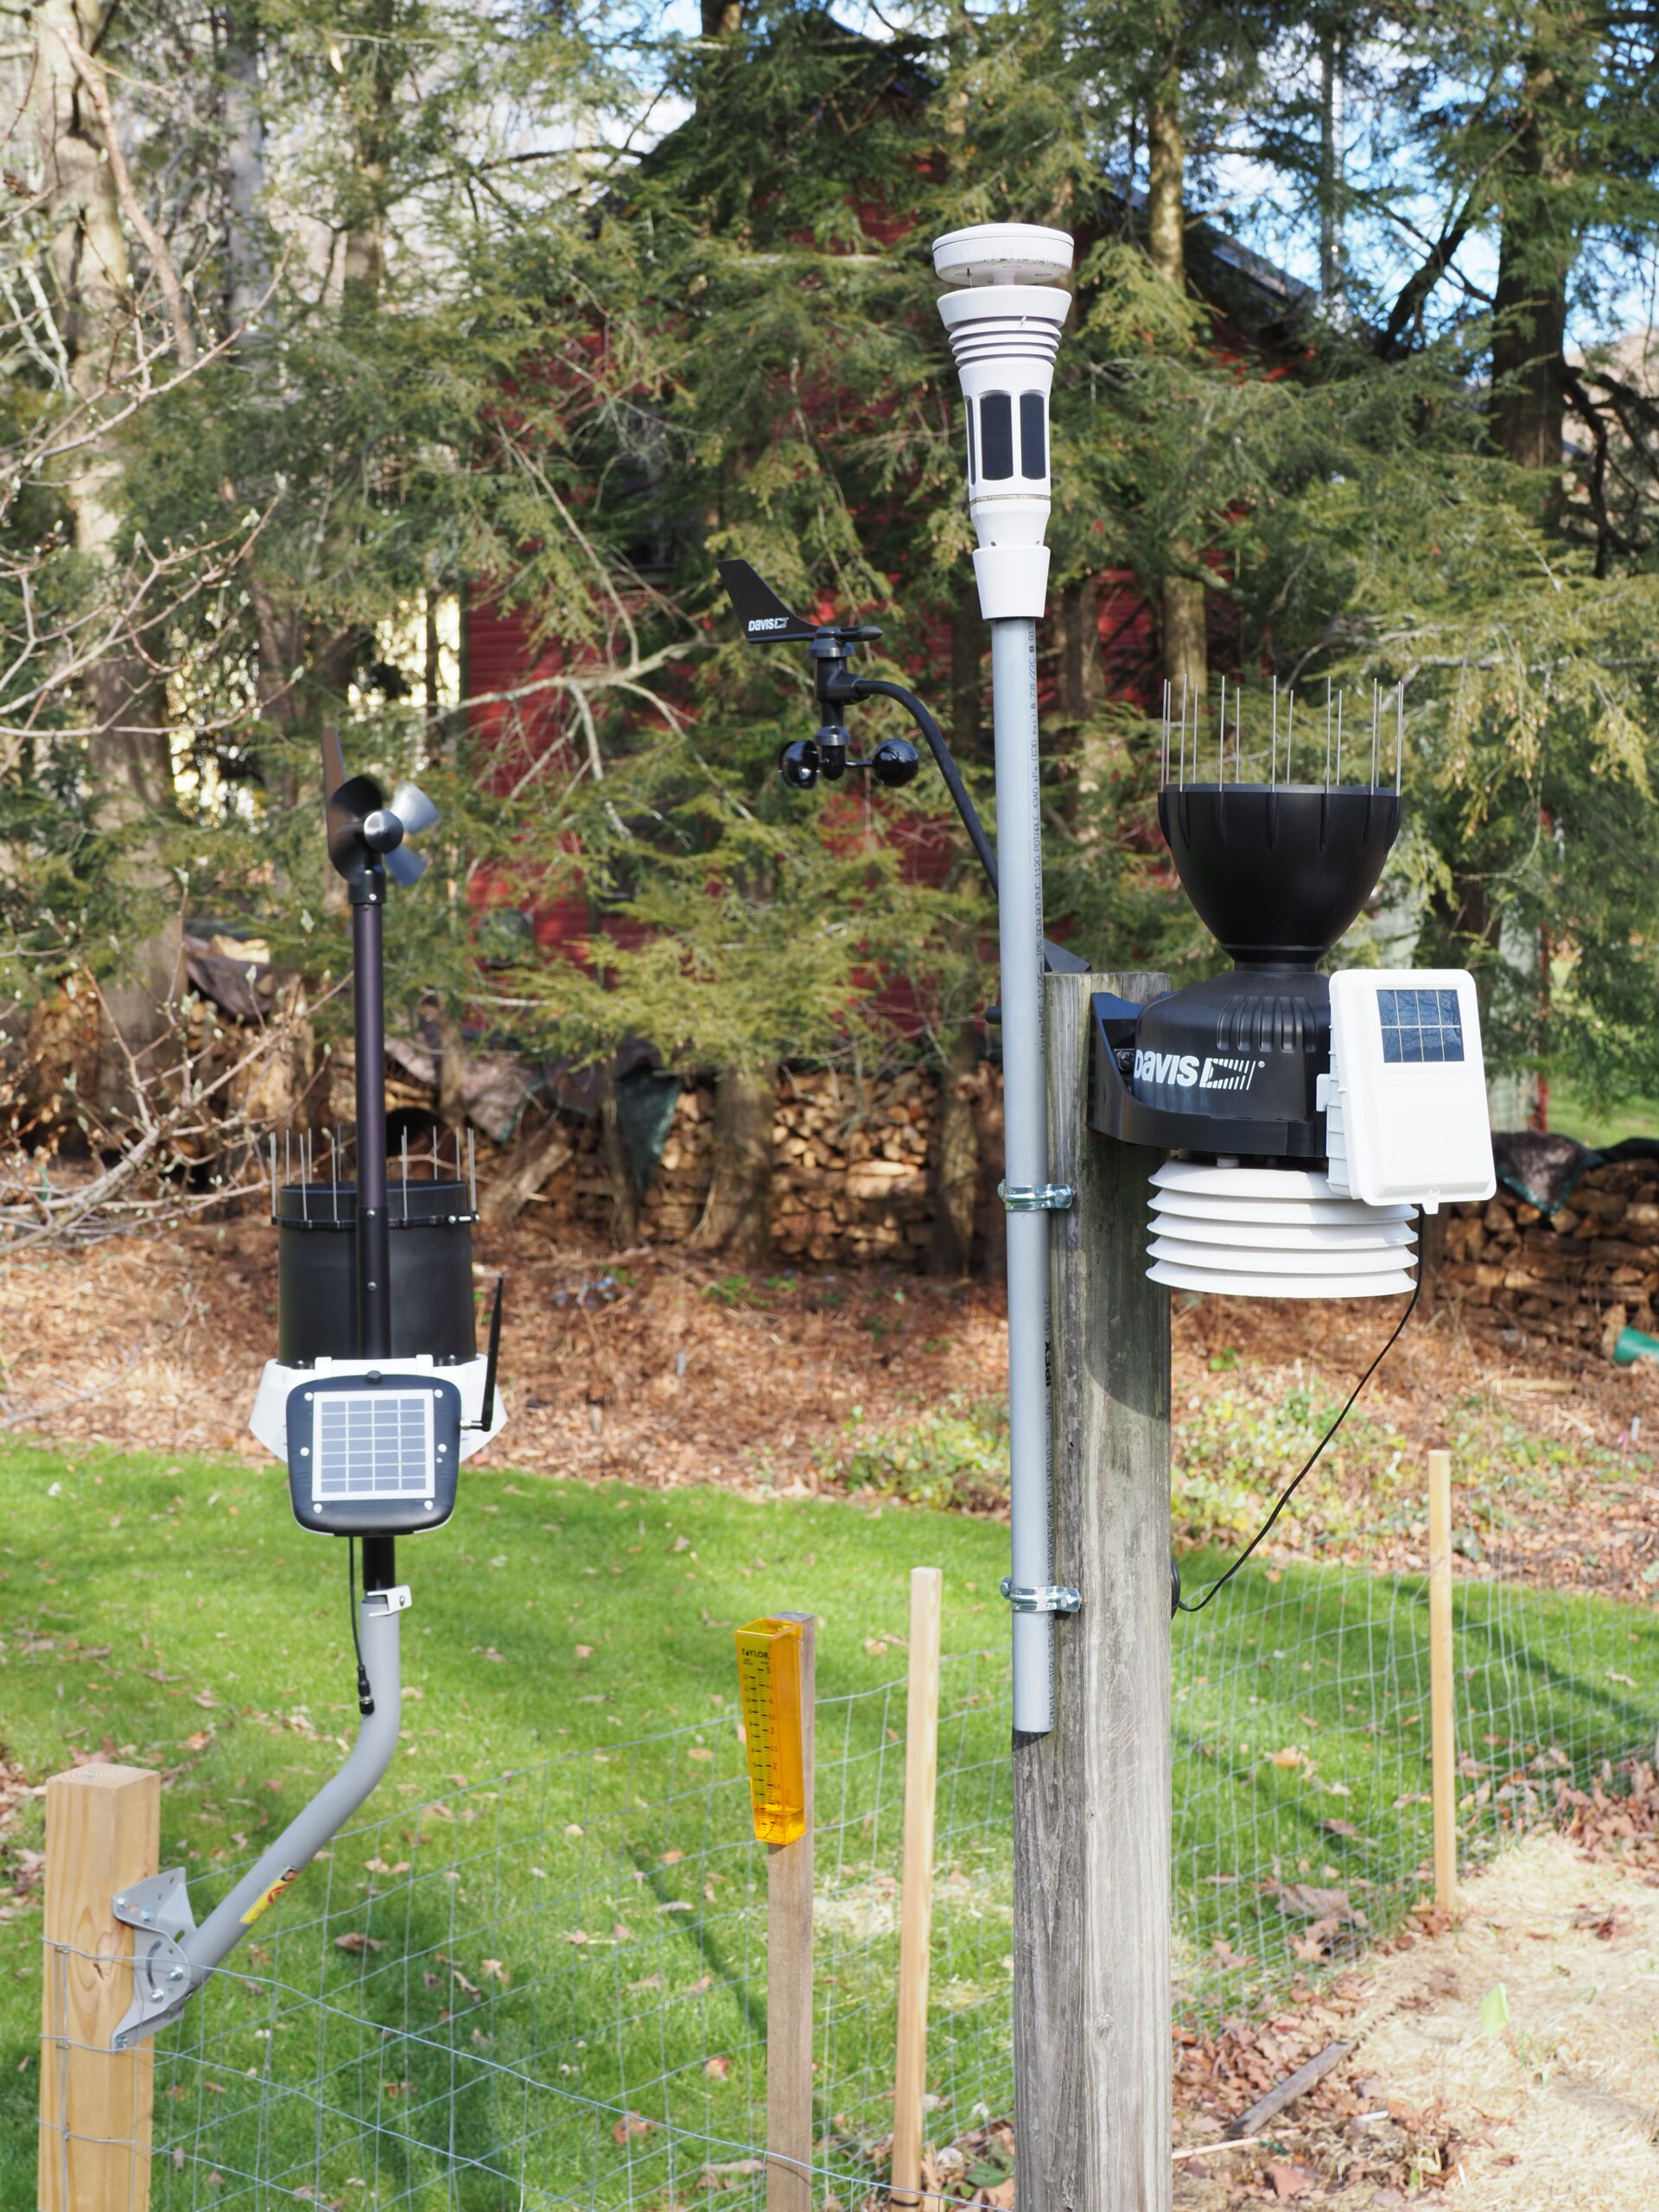 A group portrait. The WS 6000 on the left. One of the two Tempest stations sit atop a rigid plastic pipe and was clearly the easiest to install. On the right side of the same post is the Davis Vantage Pro 2 stations with the rain collector on top, solar collector on the right and naturally aspirated sensor bundle (white) at the bottom. The wind vane and wind cups for the VP 2 areto the left of the Tempest. There was some concern that the VP 2 would create vibrations that the Tempest might pick up and misinterpret. This turned out not to be the case. ANDREW MESSINGER